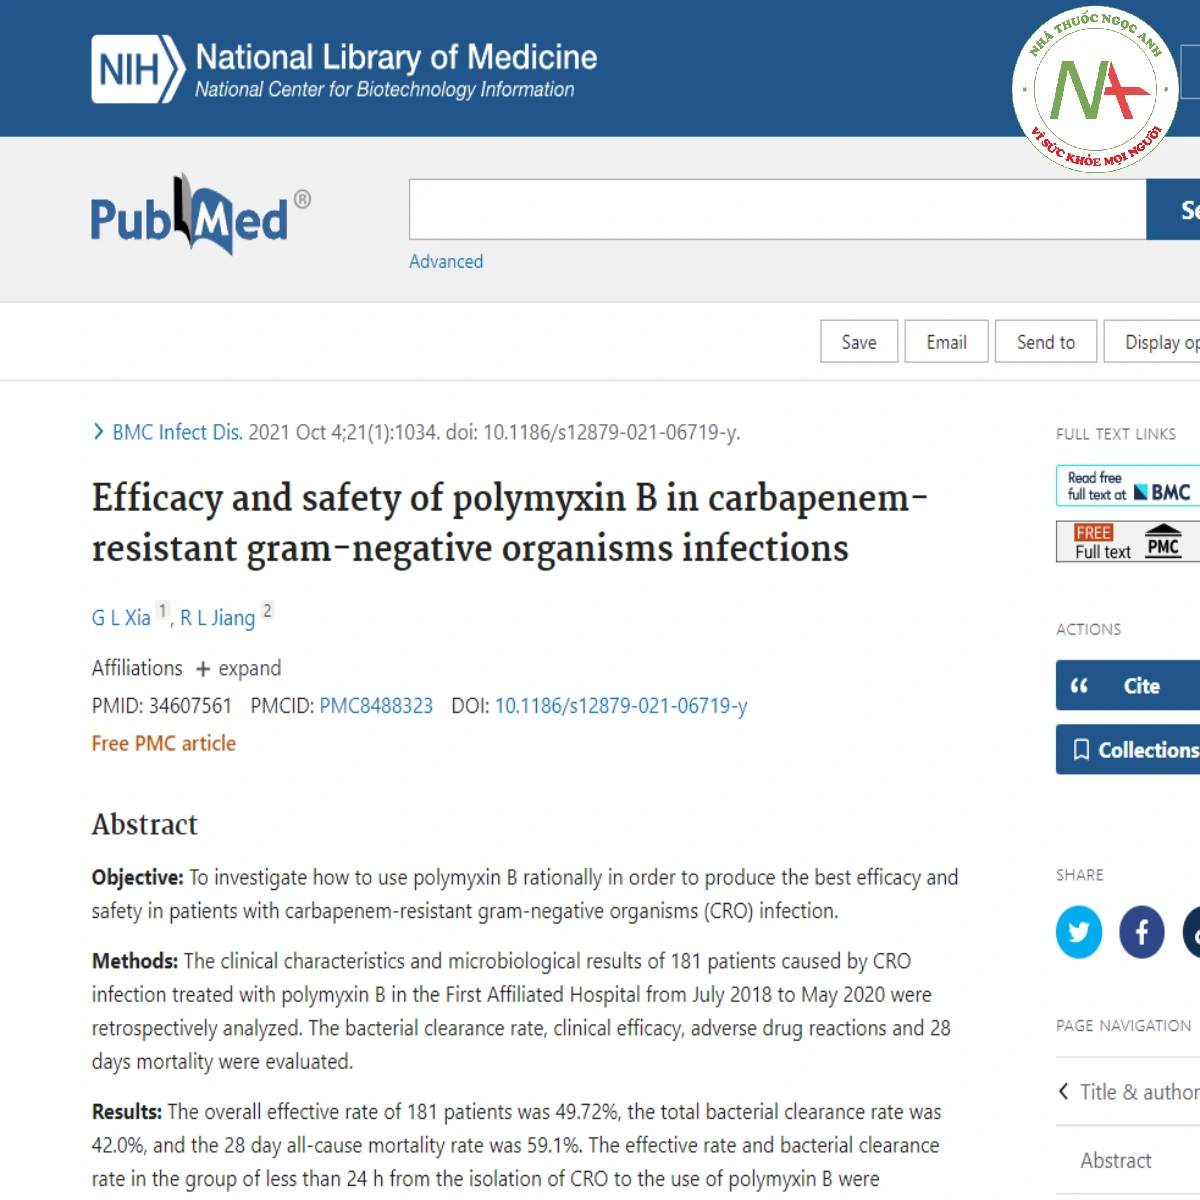 Efficacy and safety of polymyxin B in carbapenem-resistant gram-negative organisms infections